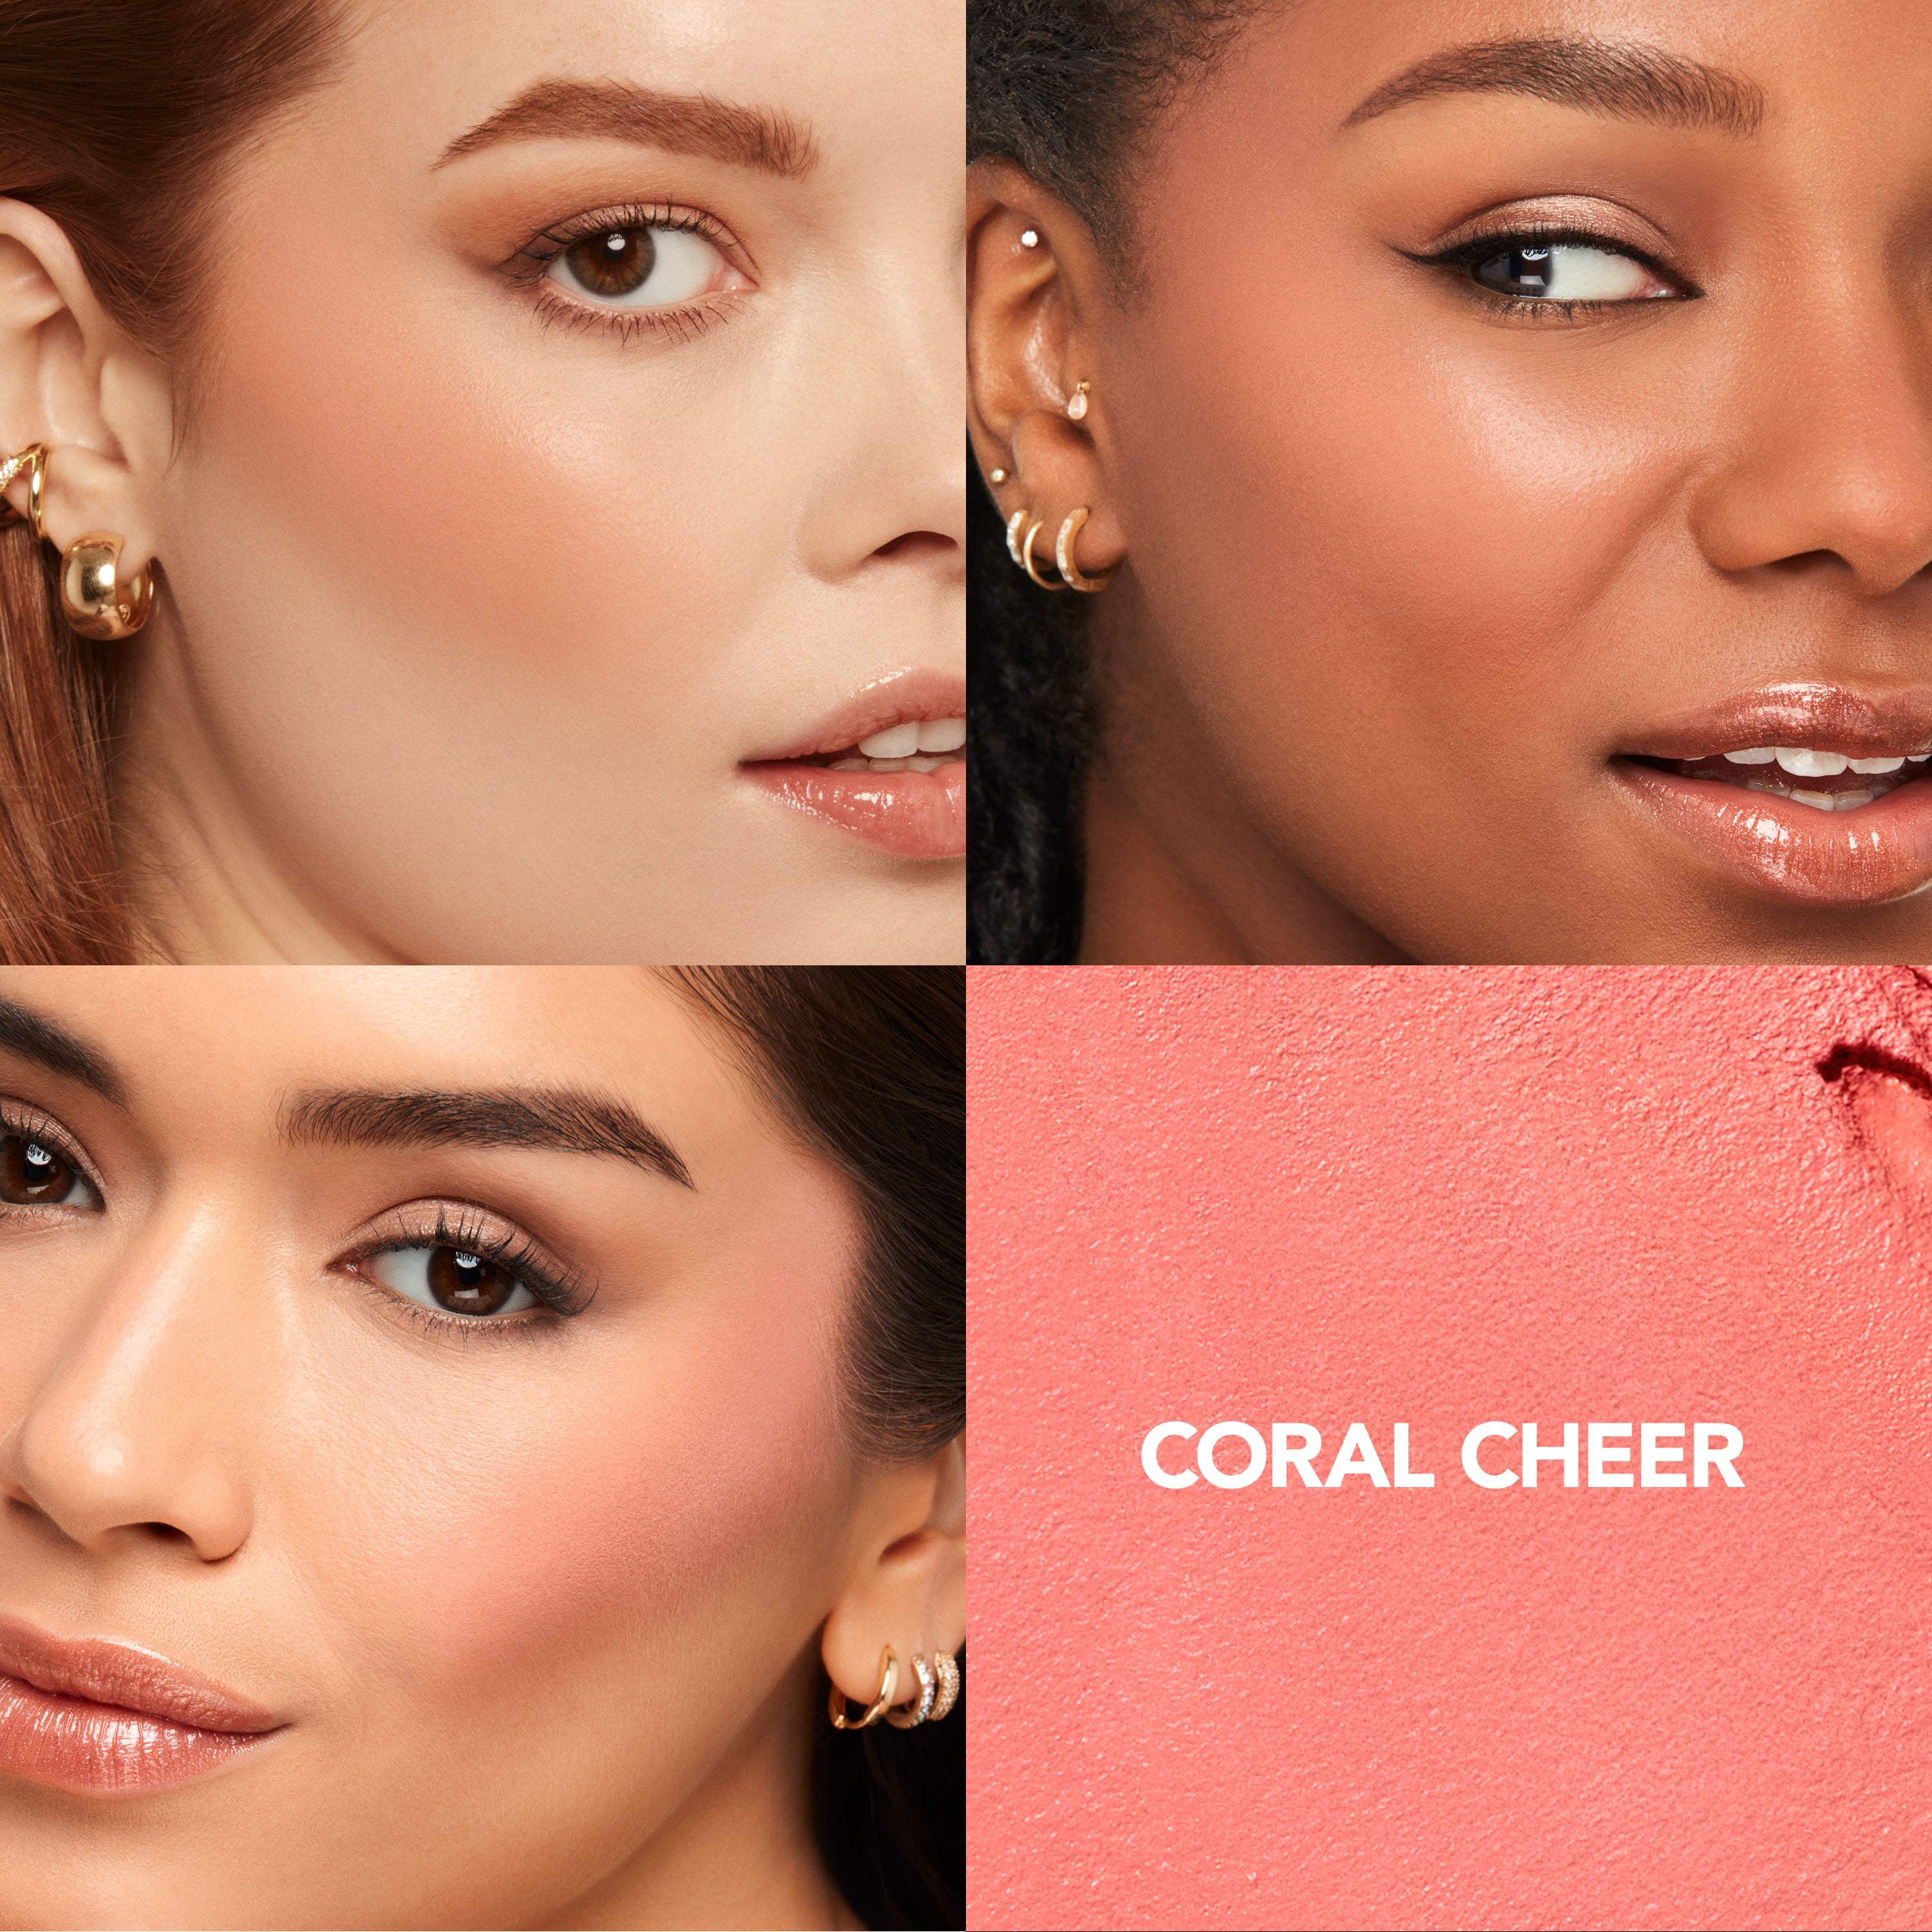 Coral Cheer